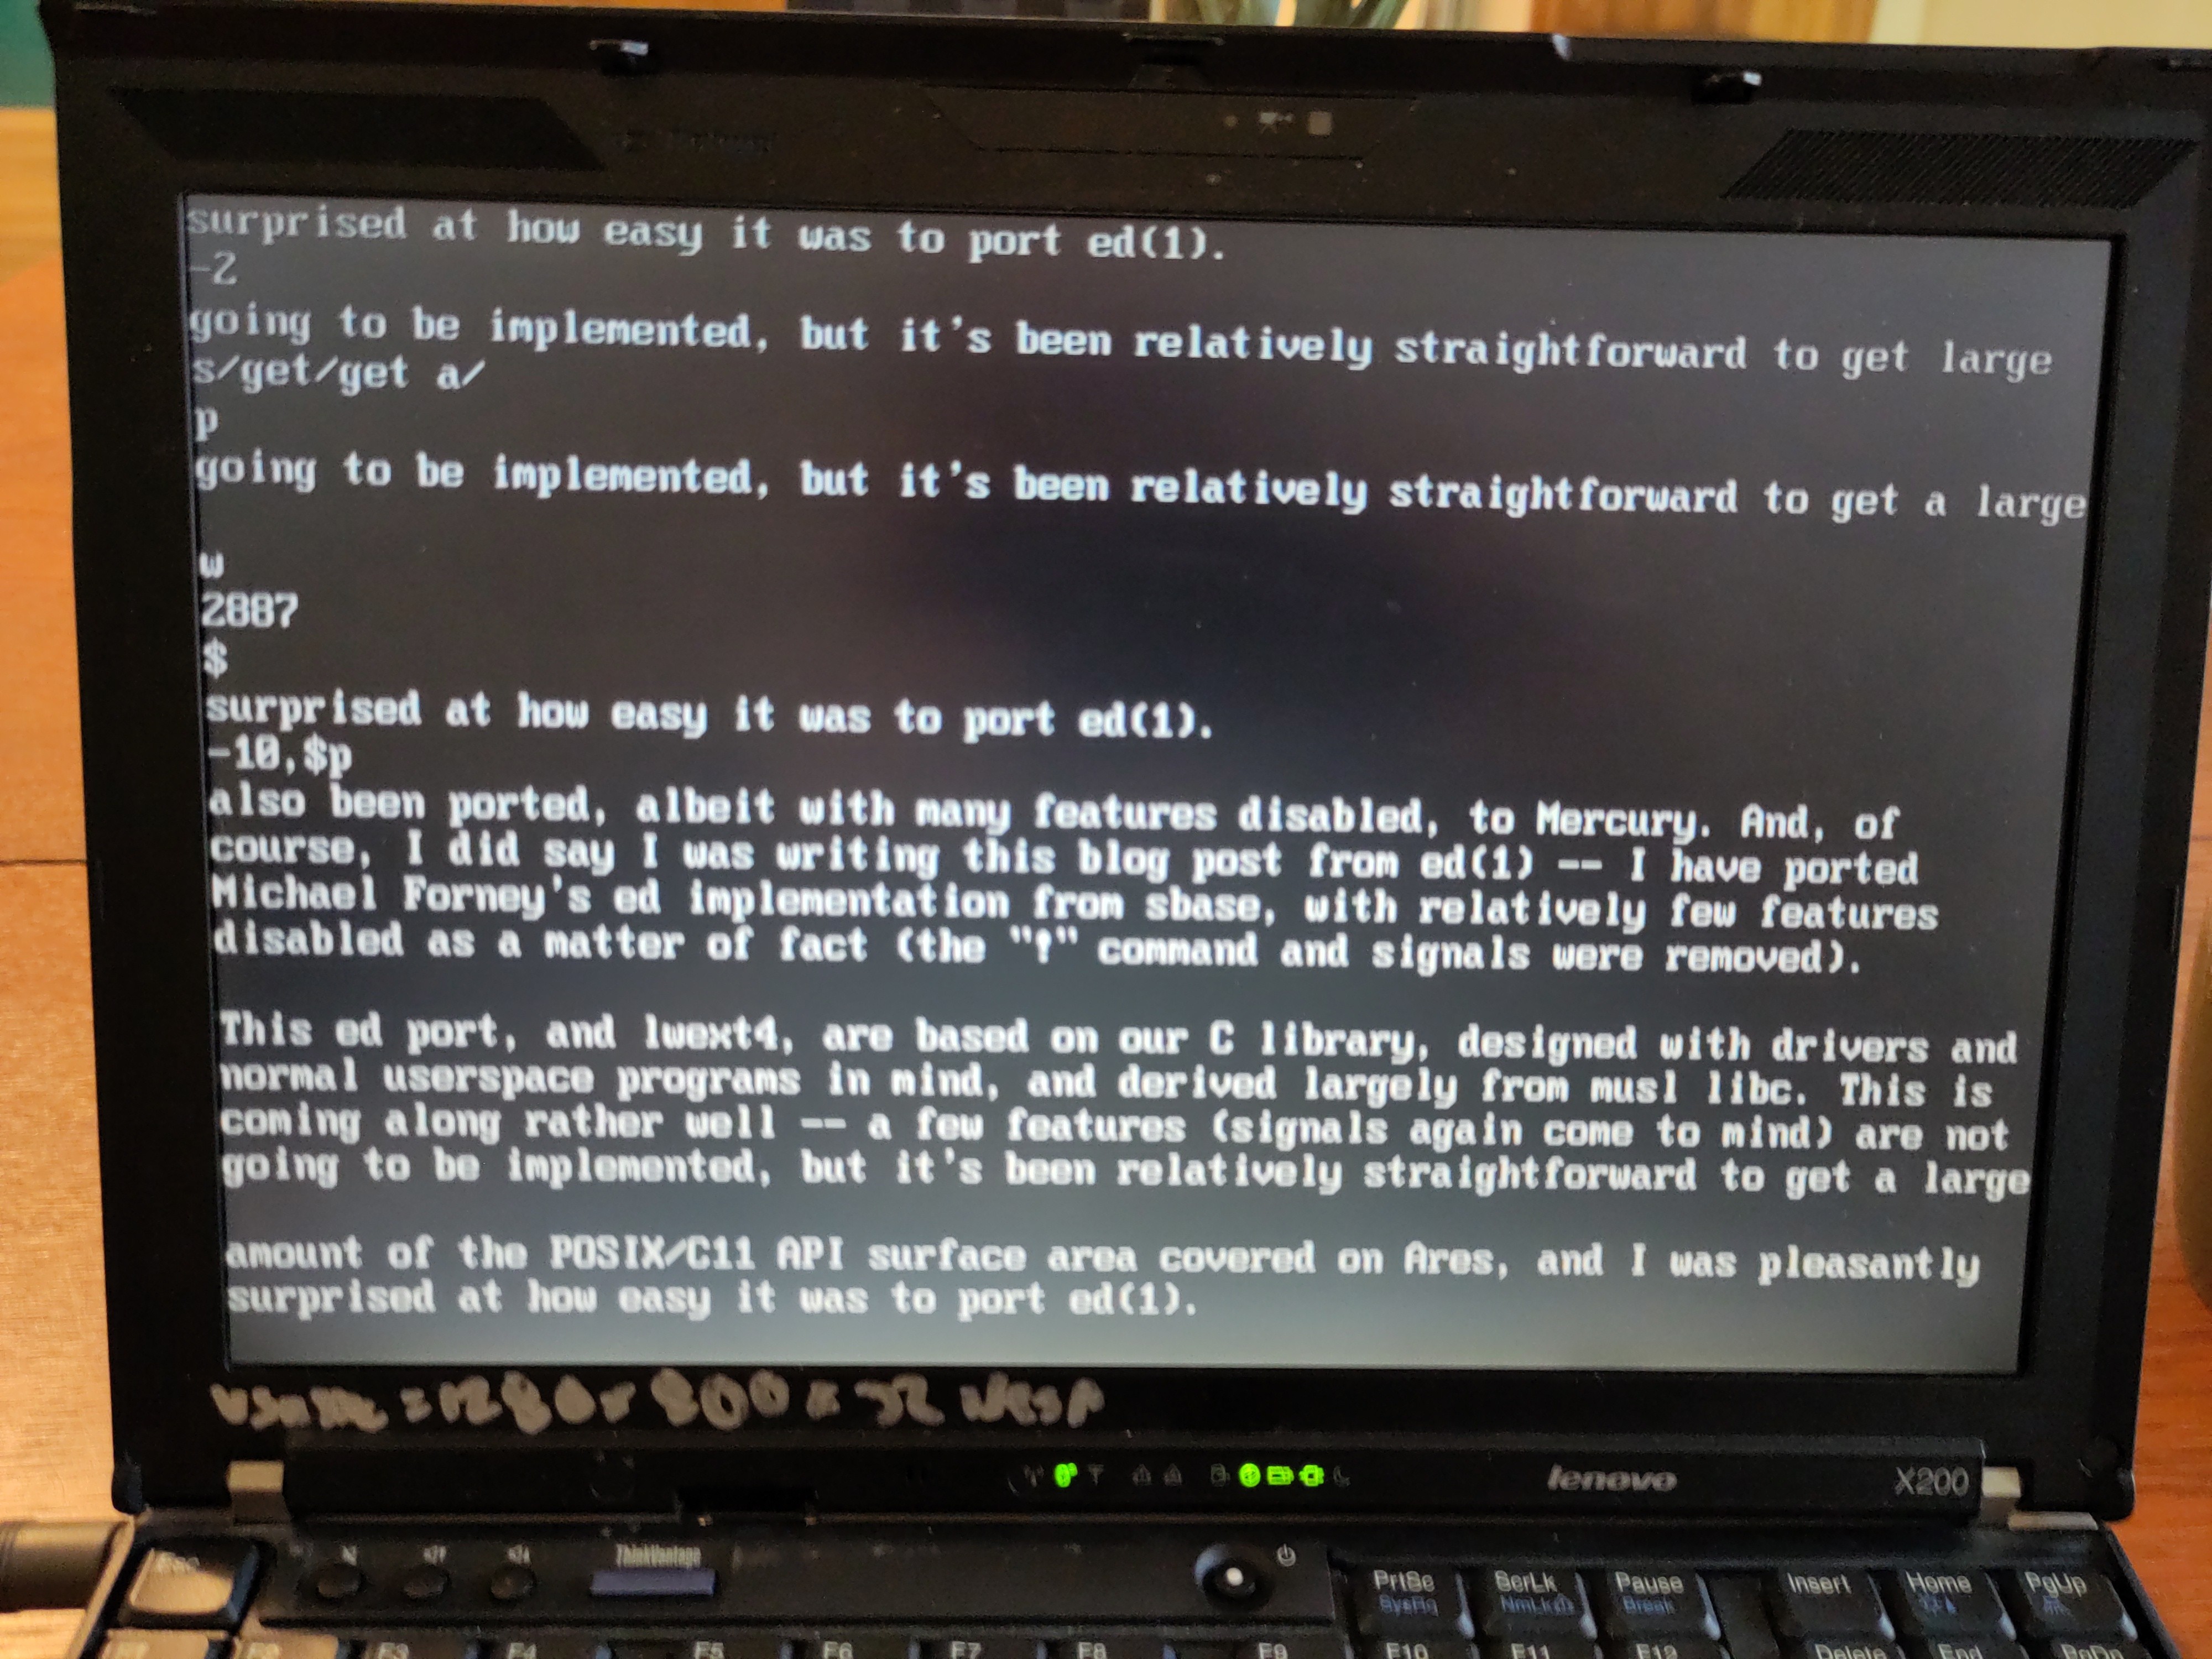 A picture of my ThinkPad while I was editing this blog post